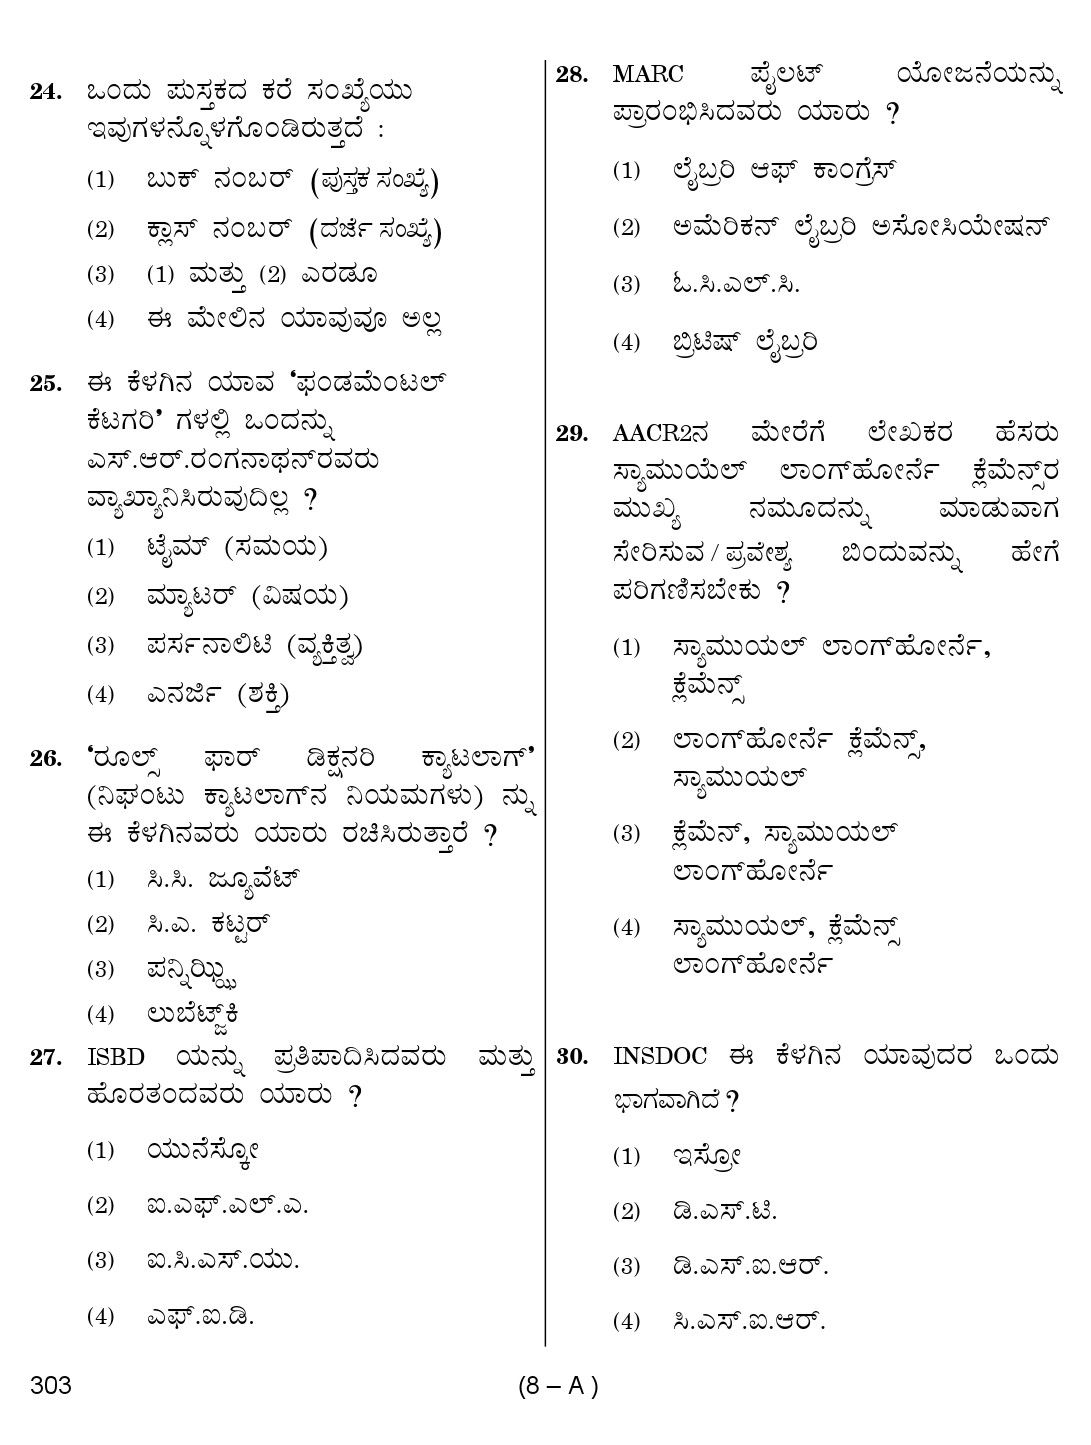 Karnataka PSC 303 Specific Paper II Librarian Exam Sample Question Paper 8